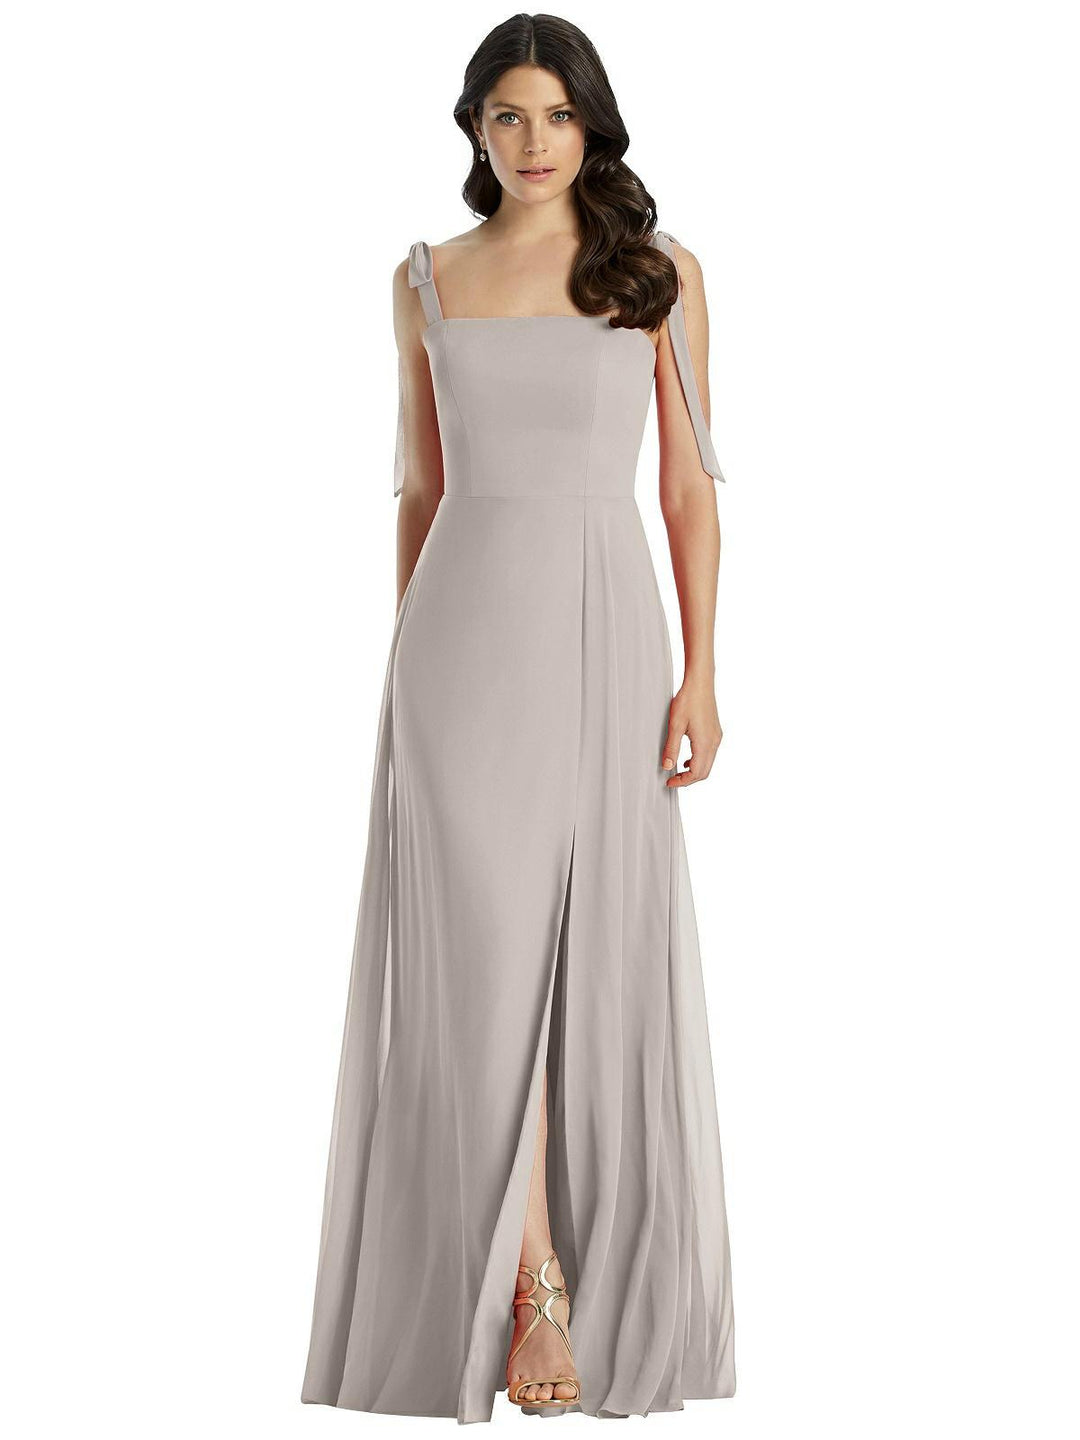 Tie Strap Chiffon Gown with Front Slit by Dessy Size 24